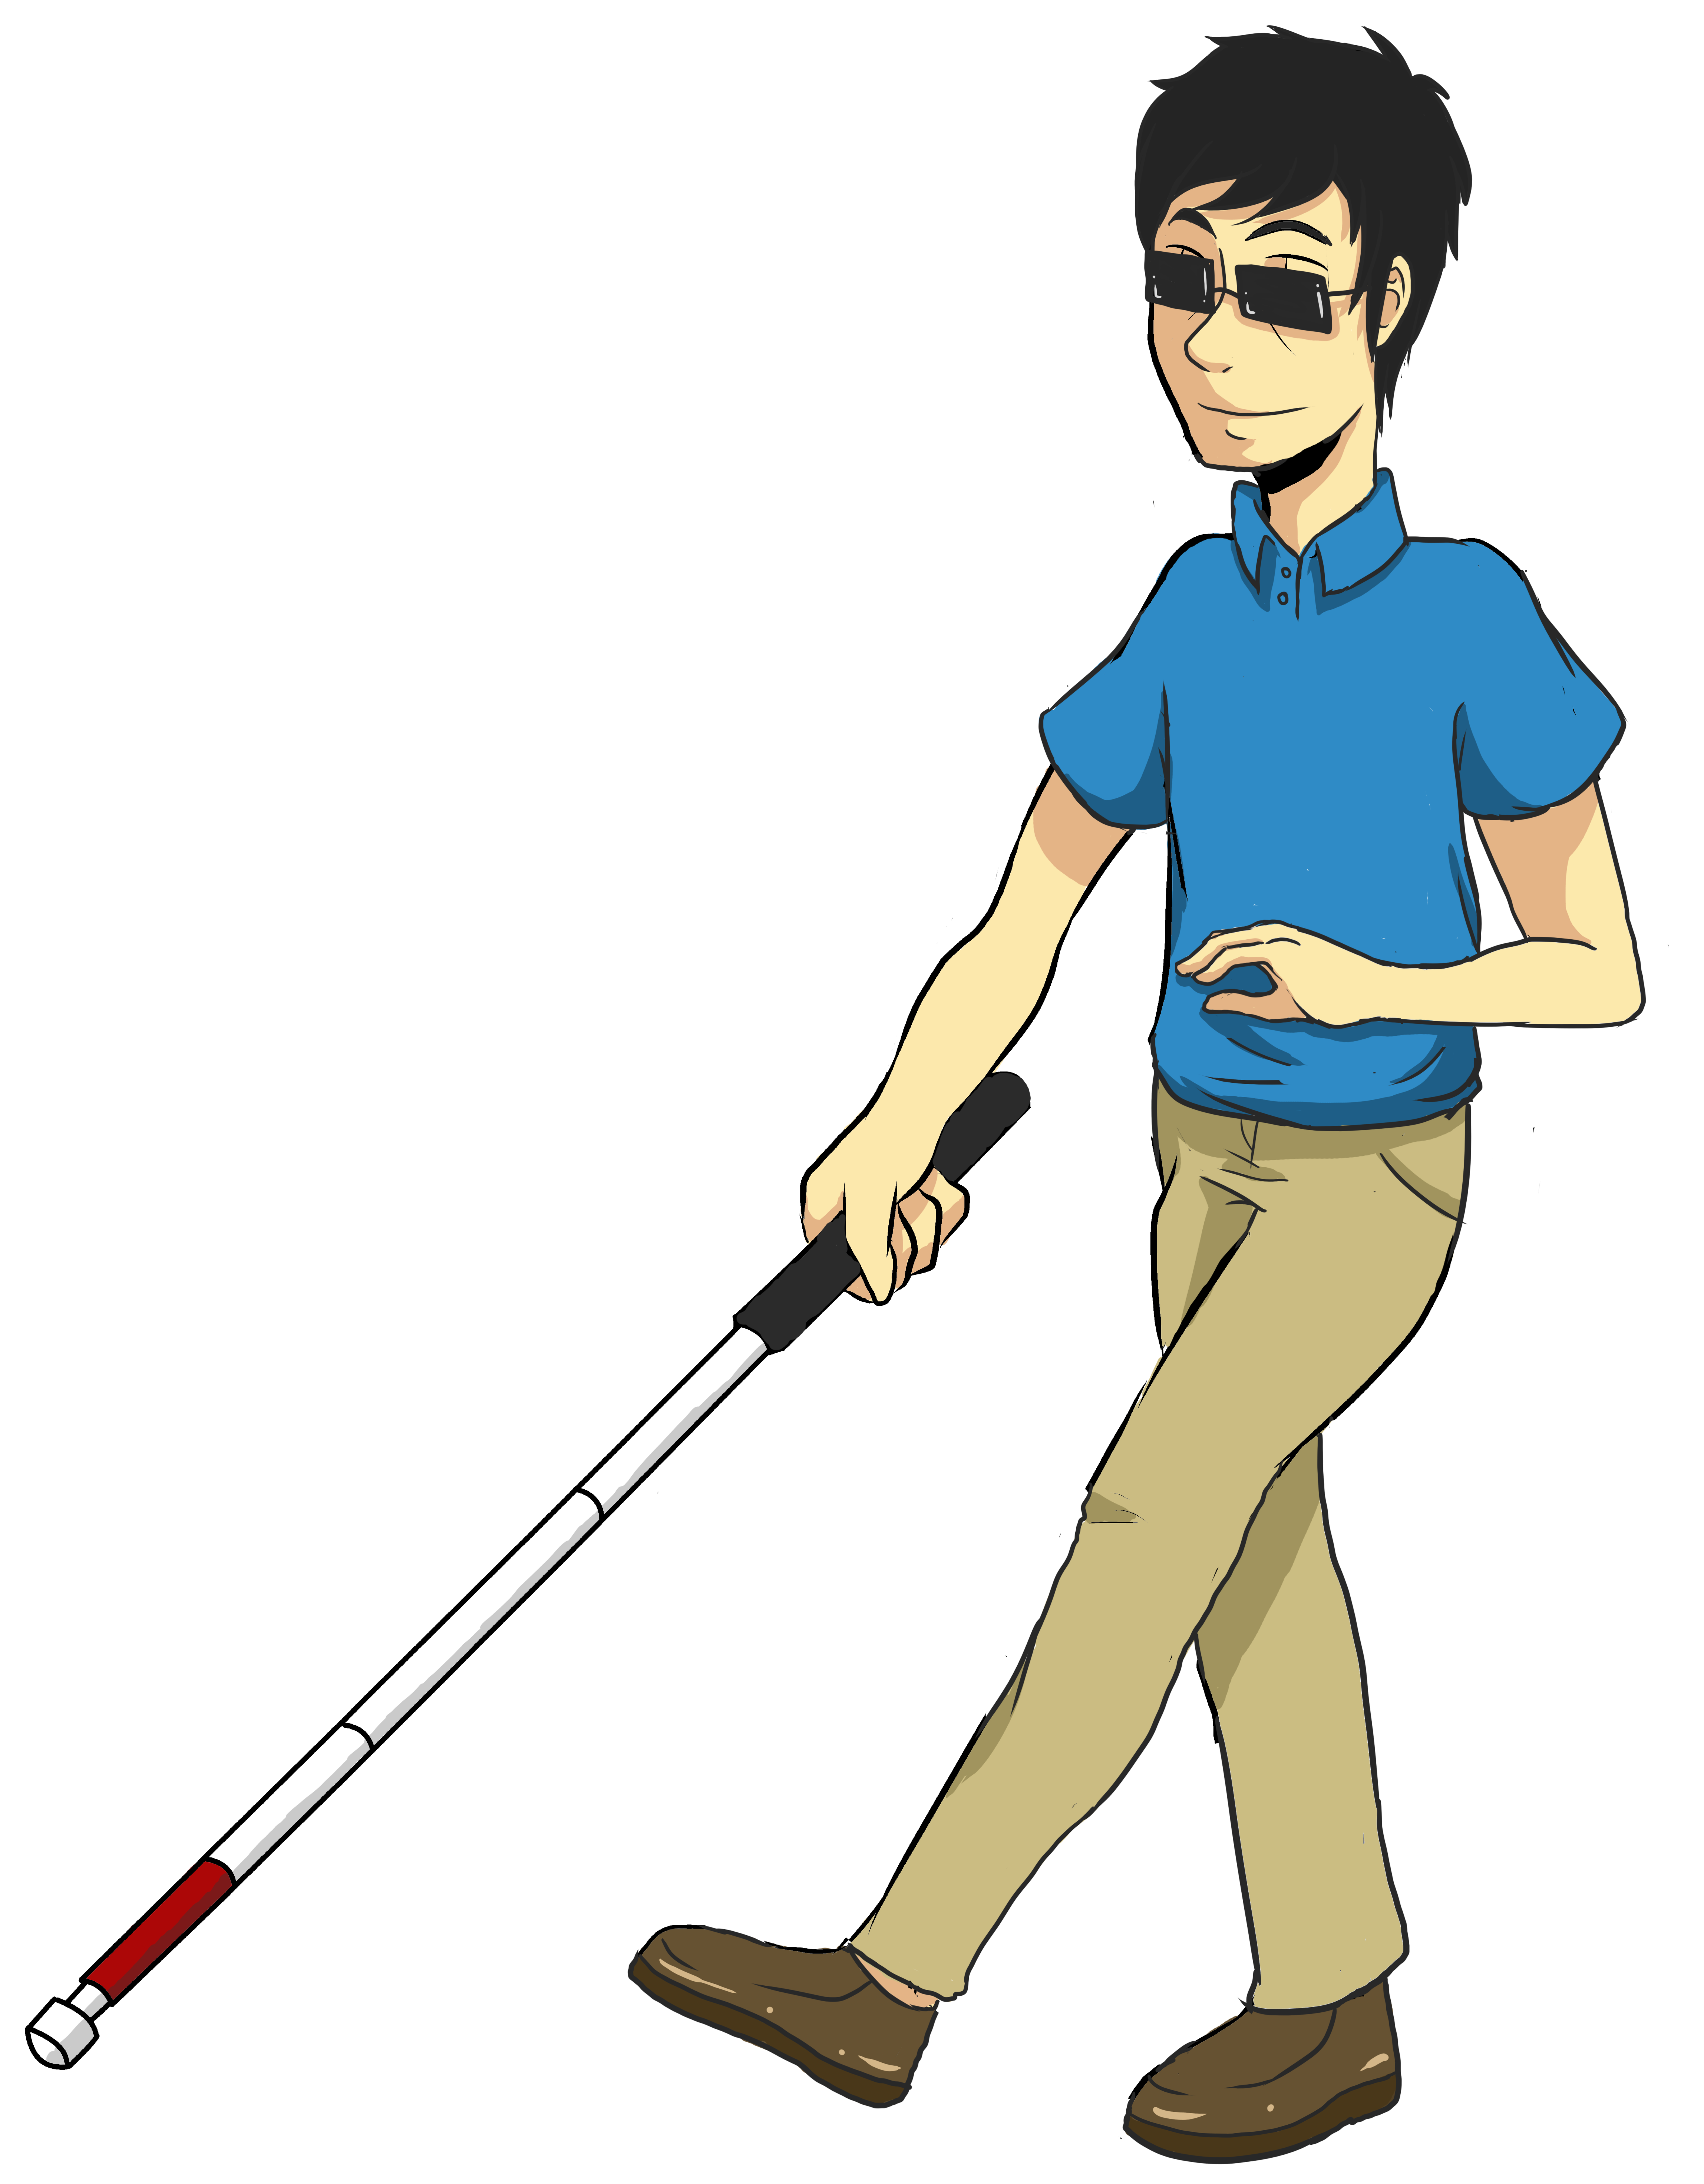 cane-2-man-cane-on-the-left.png